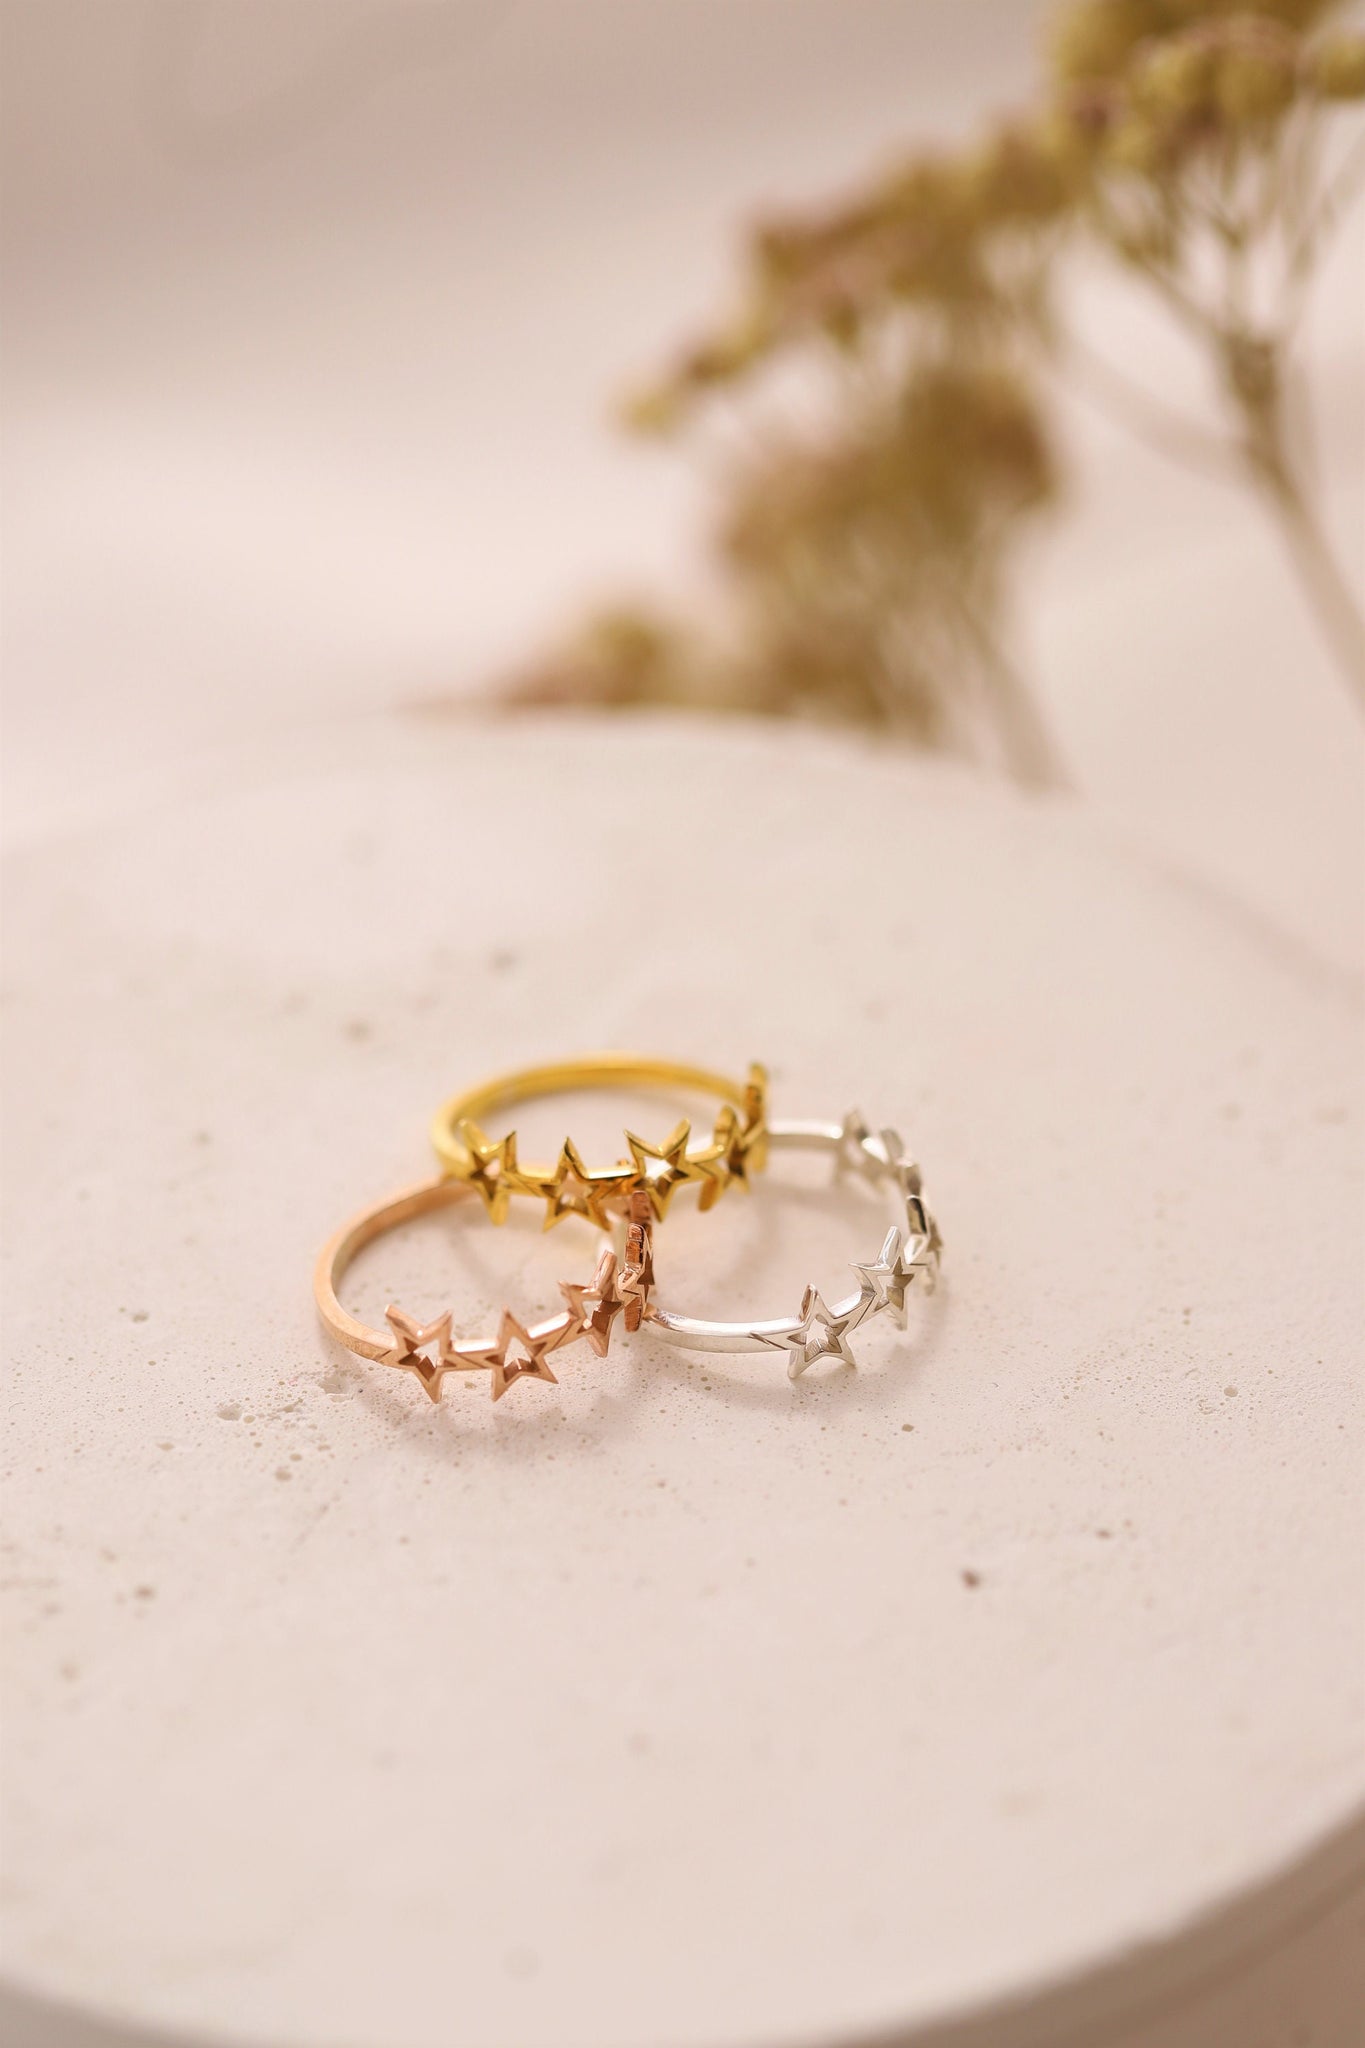 Dainty Star Ring, Mothers Day Ring, Minimalist Ring, Gift For Mom, Rings For Women, Mothers Day Gift, Statement Ring, Delicate Unique Ring